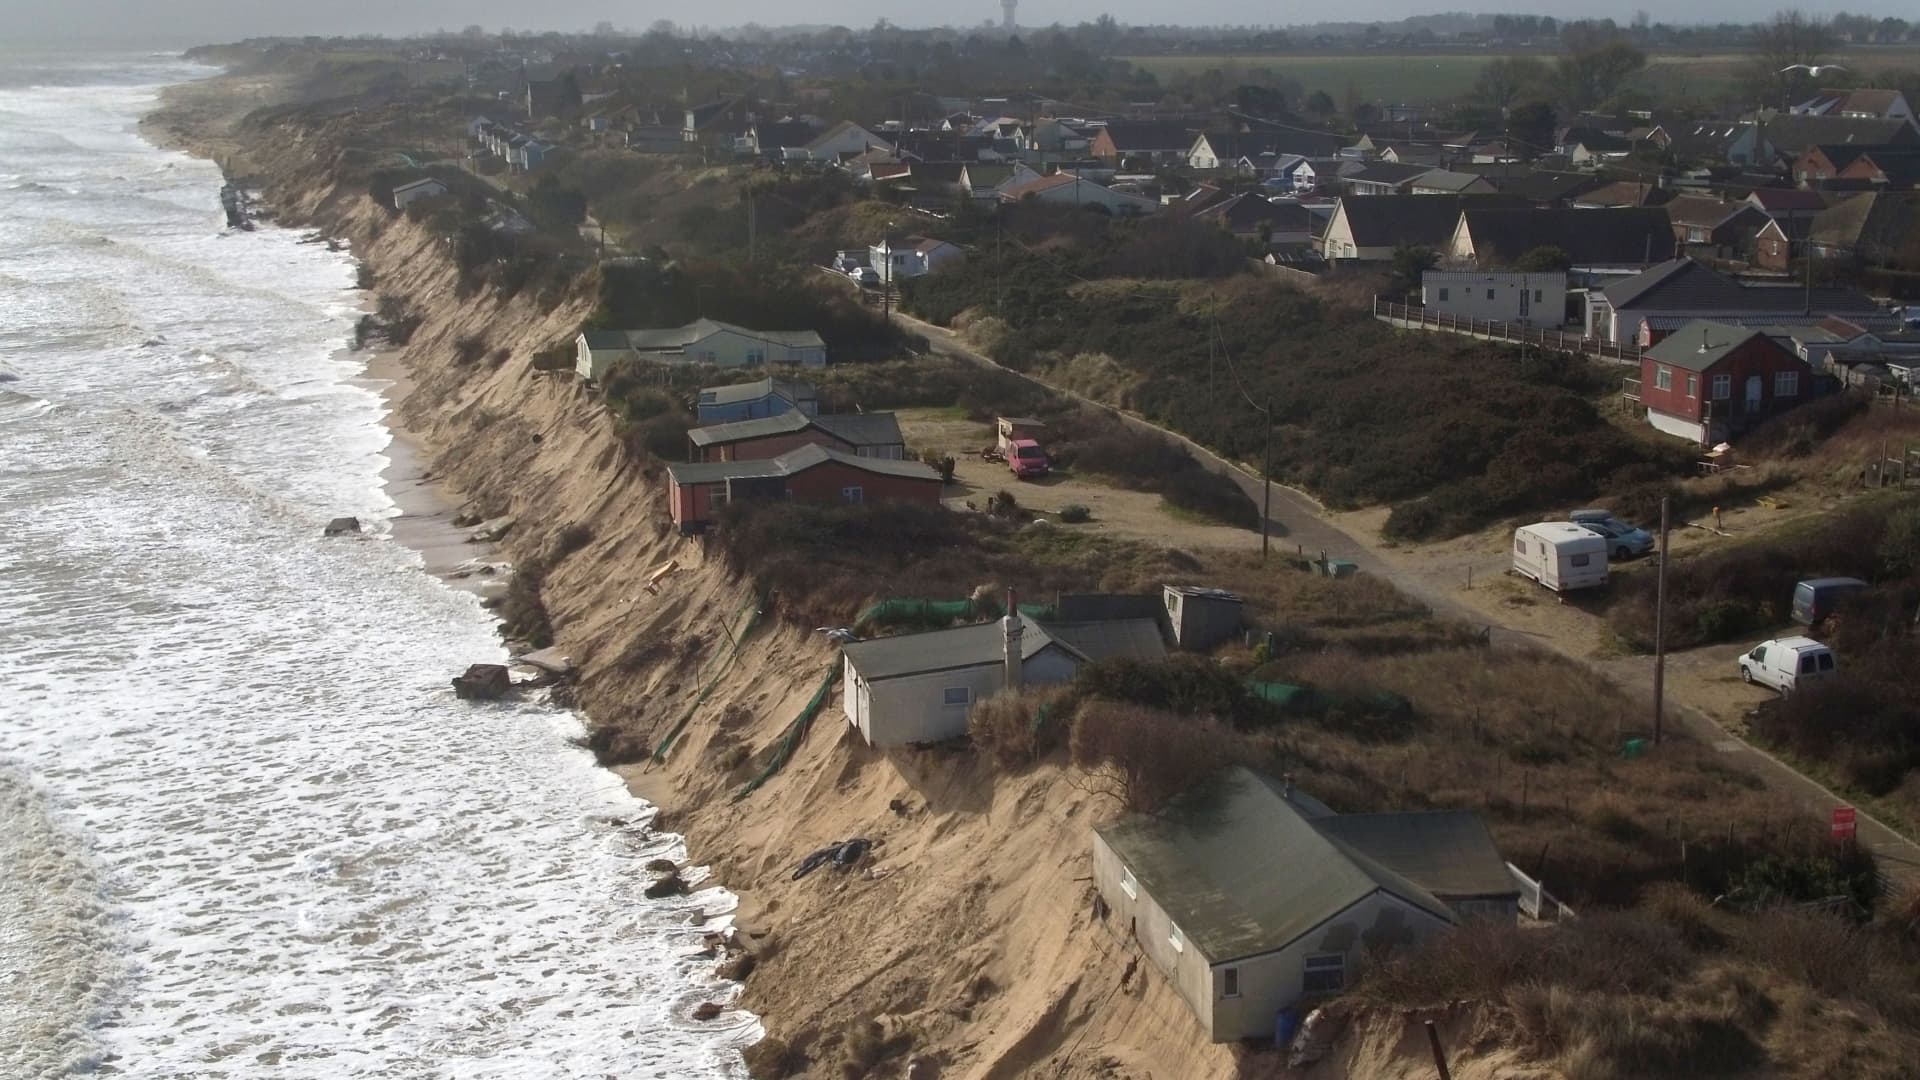 This image from 2018 shows properties on the edge of a cliff on the coast of Norfolk, England. Rising sea levels and coastal erosion pose a threat to many coastal communities around the world.